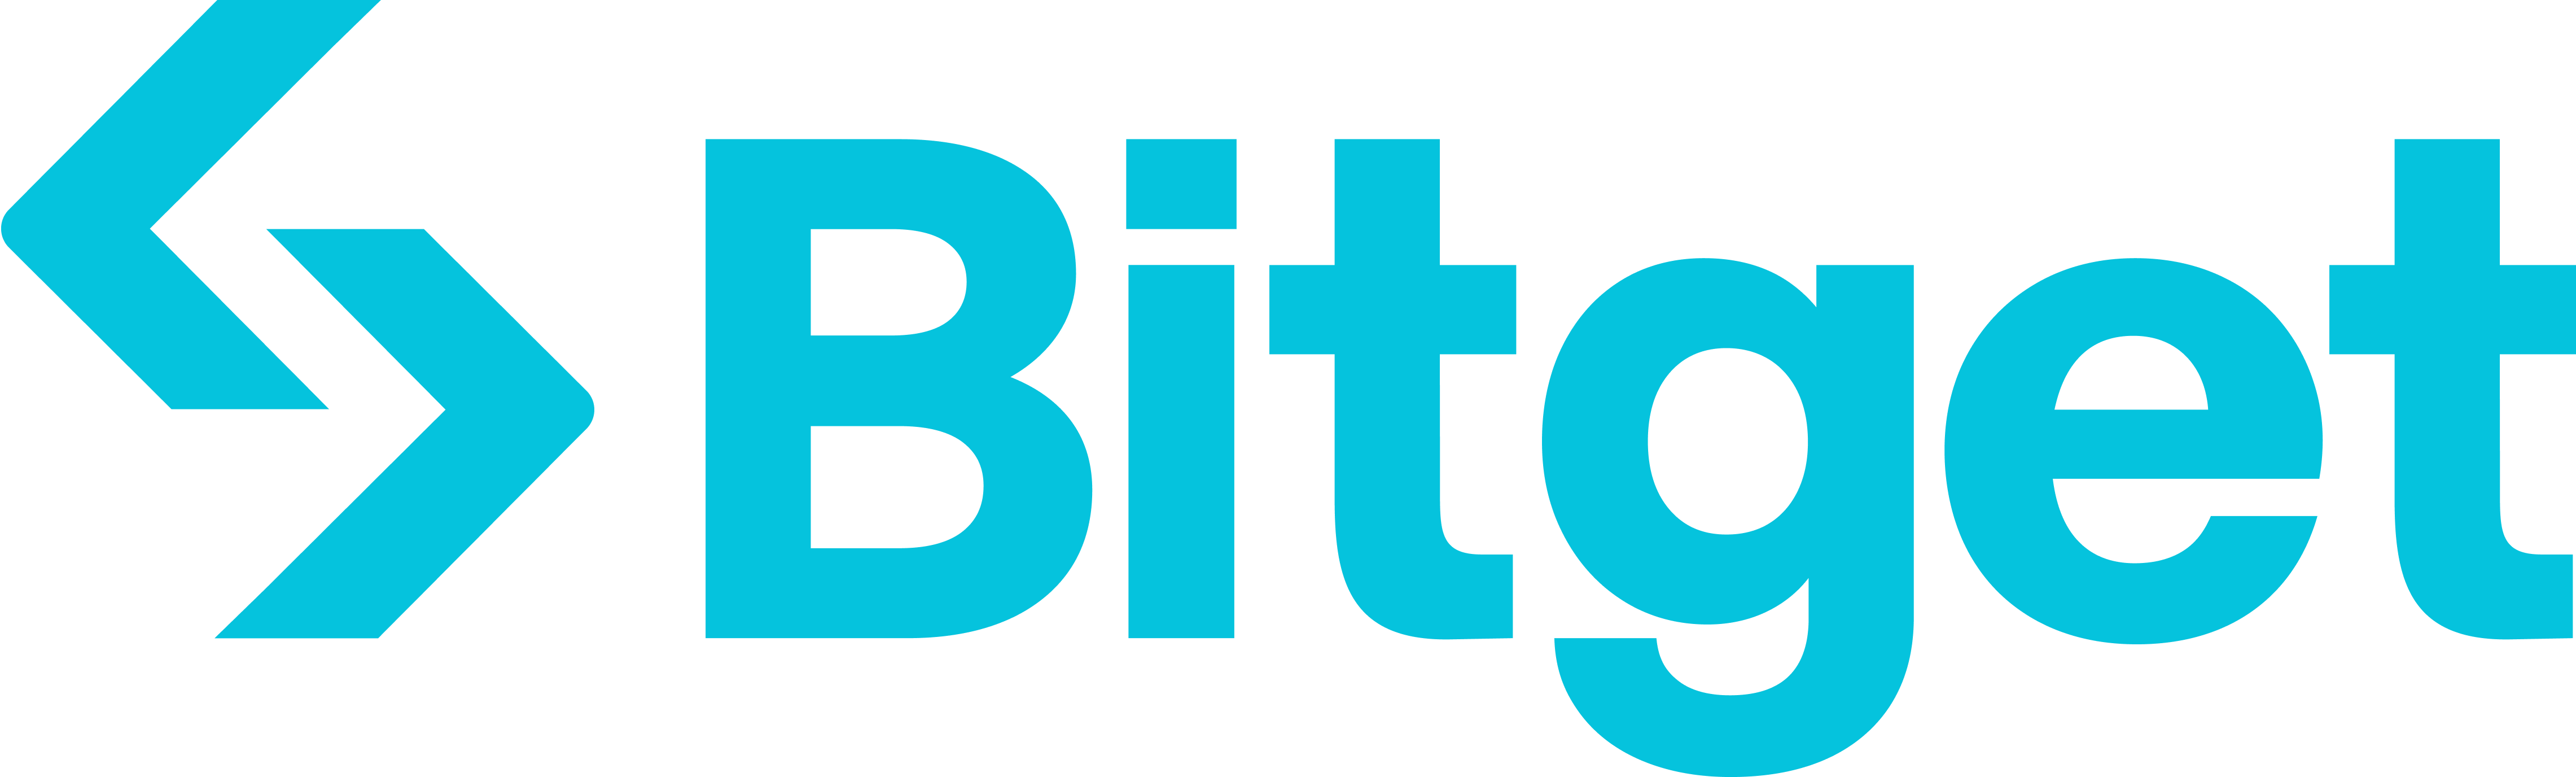 Bitget to Host Its First Crypto Experience Day on Aug 12 to Sparks GenZ’s Interest in Crypto 